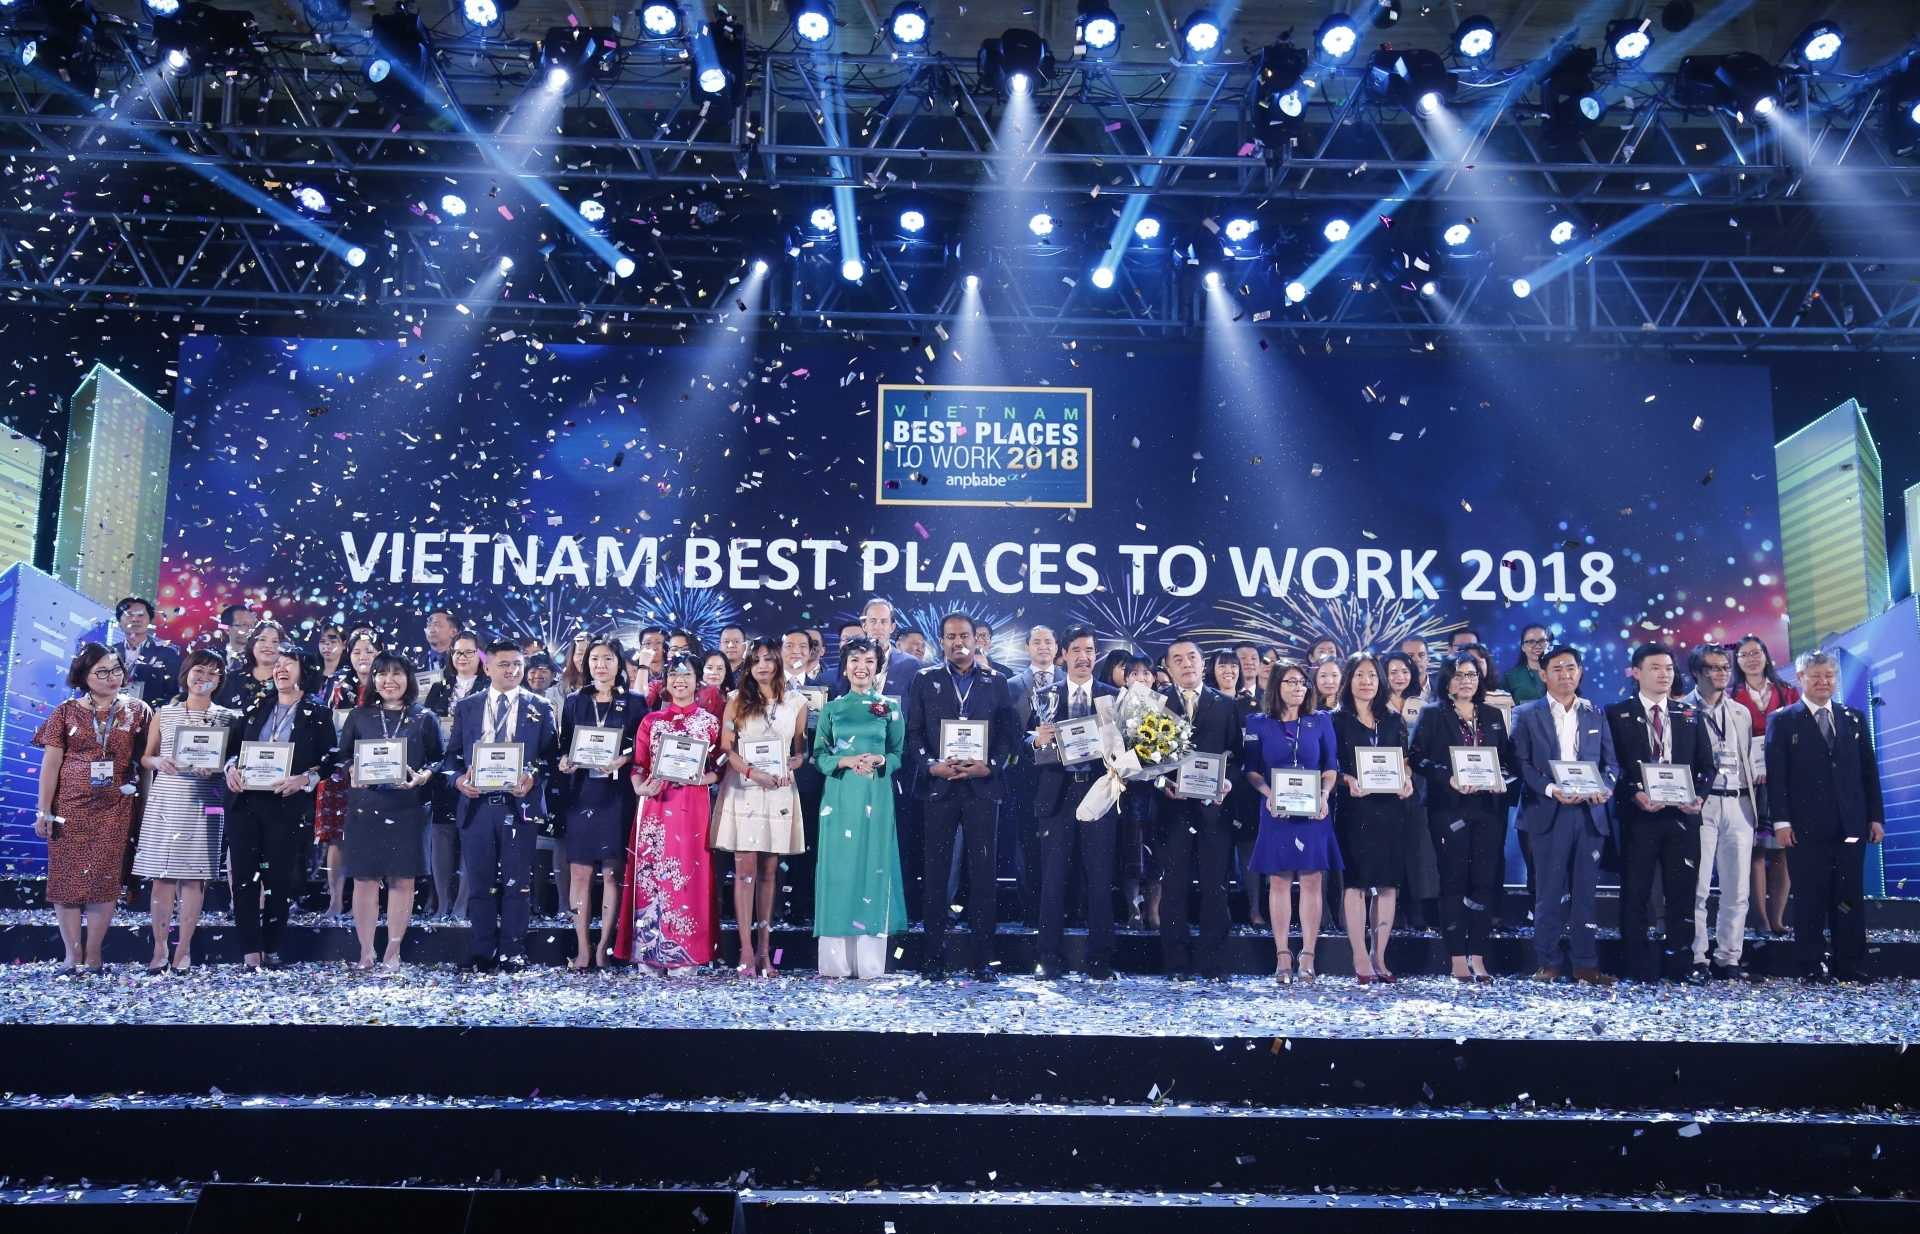 More companies facing talent loss problems in Vietnam